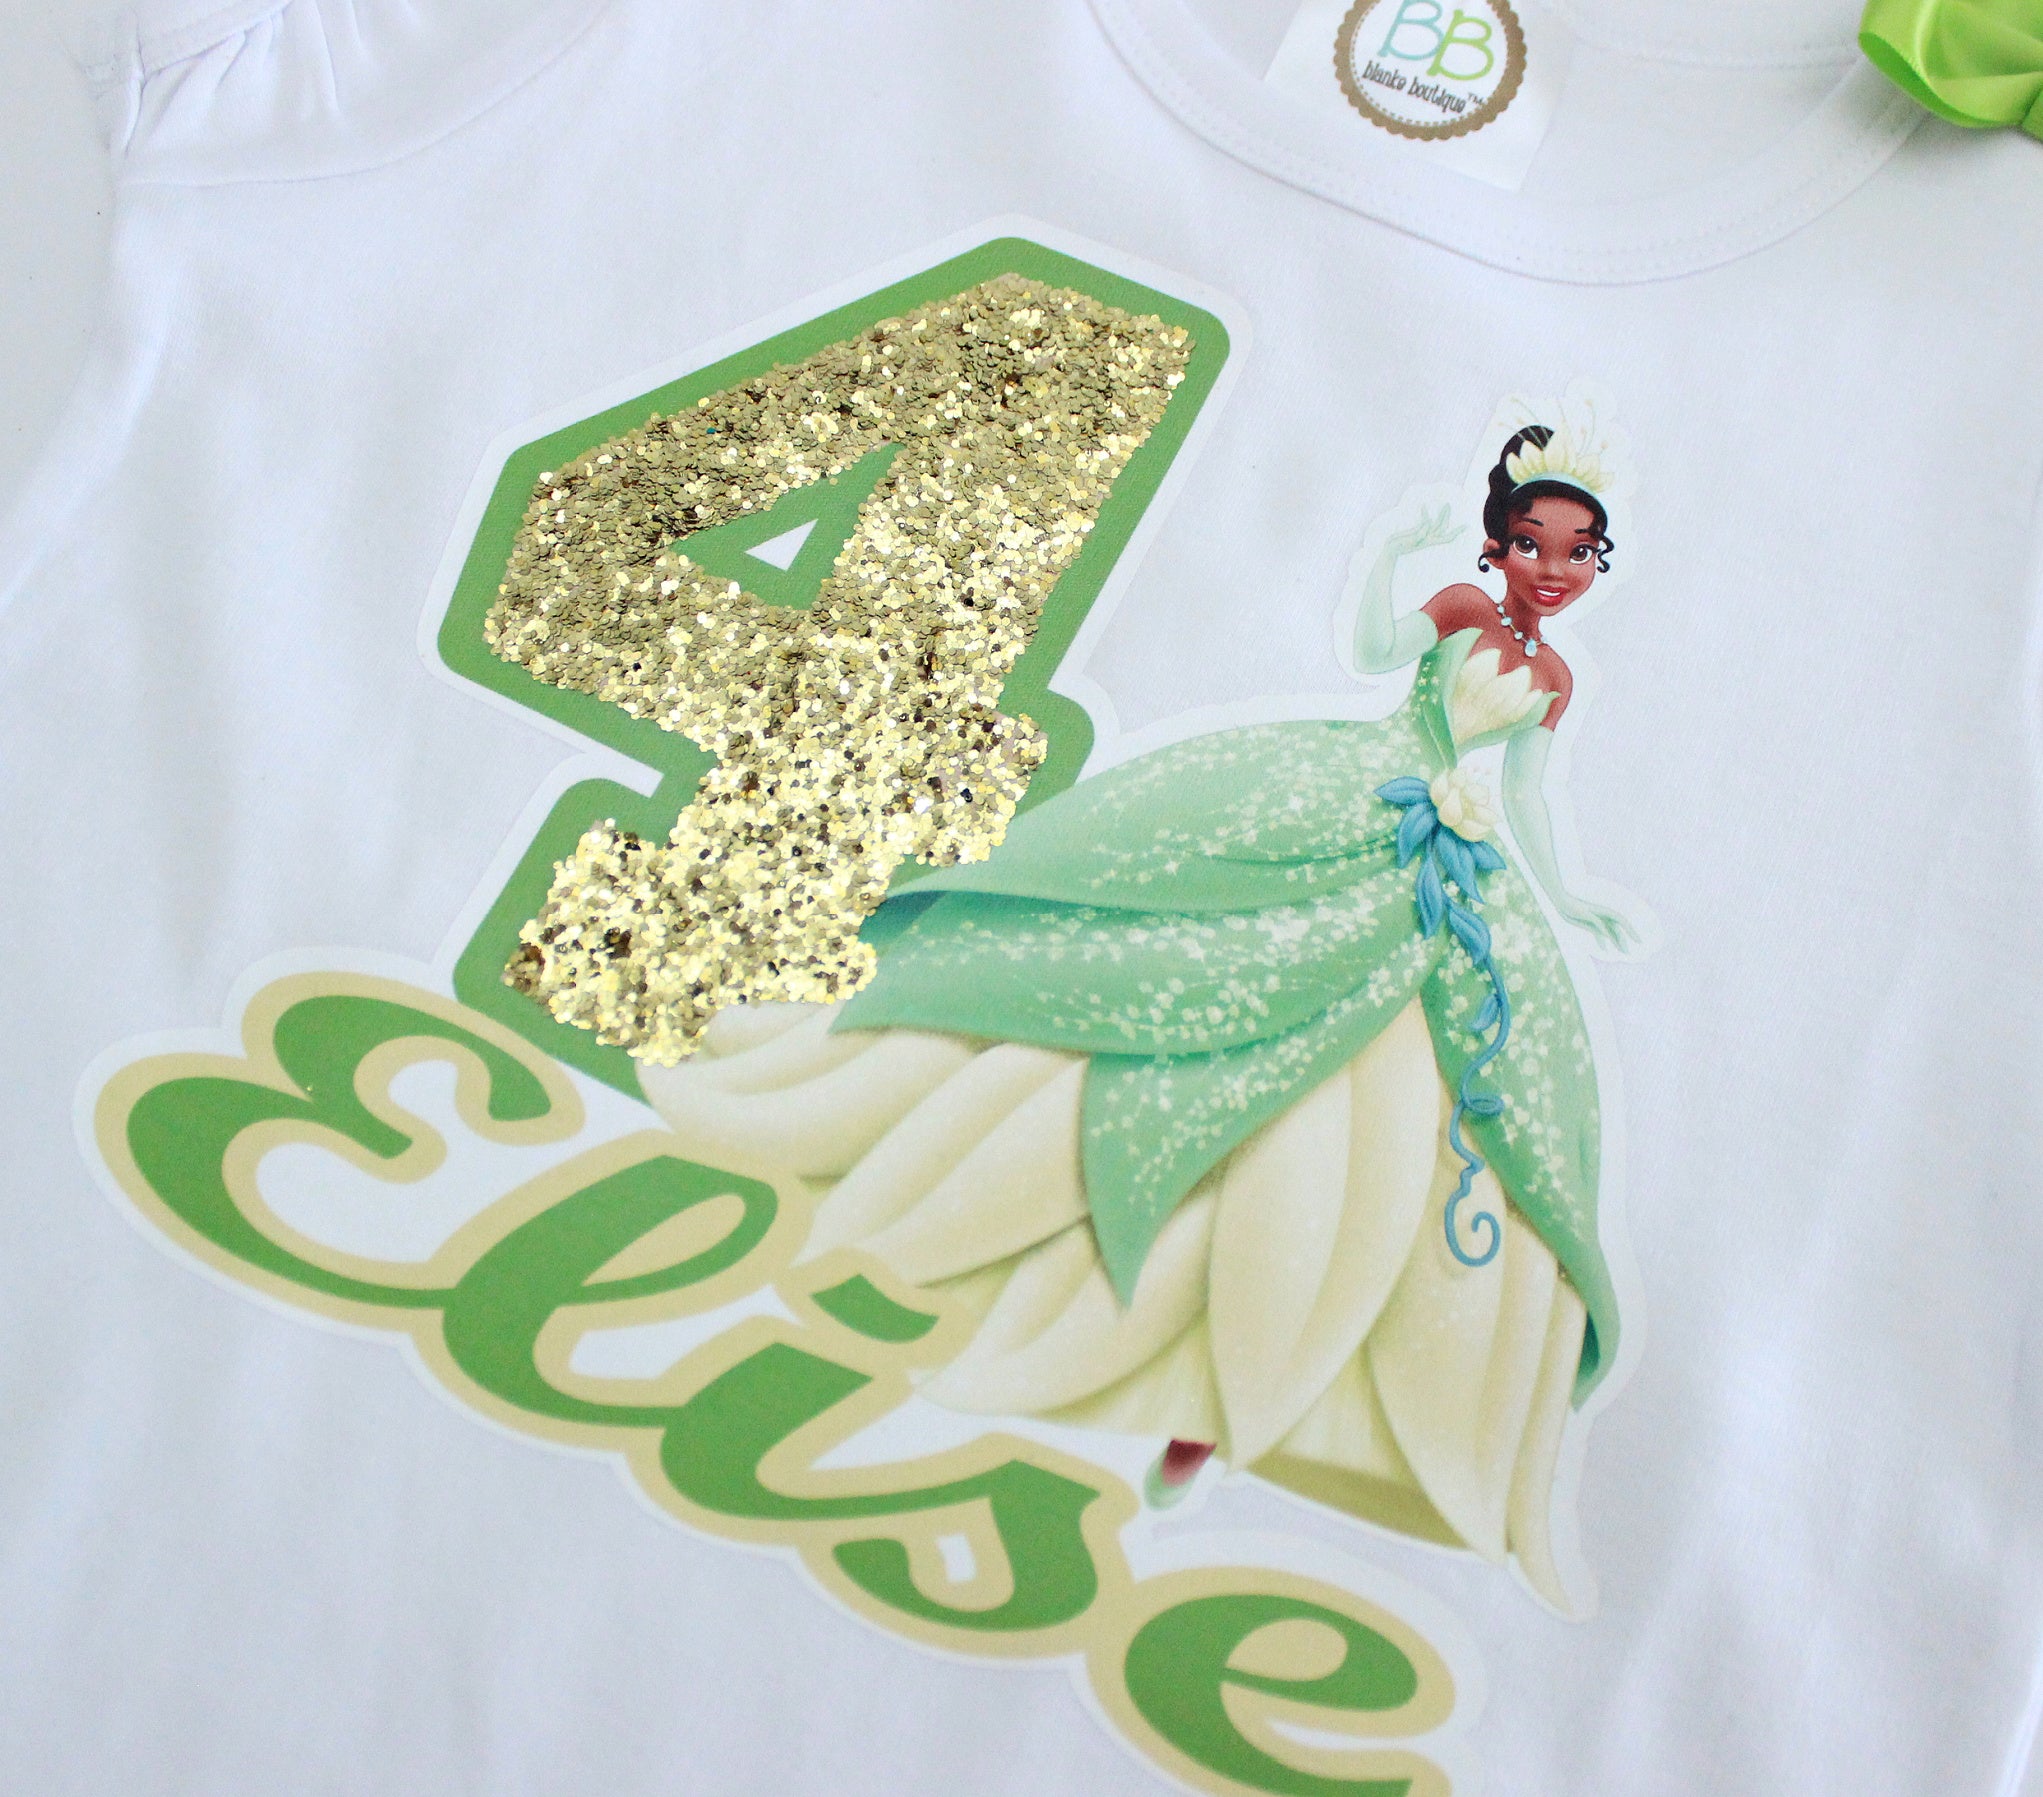 Tiana Outfit